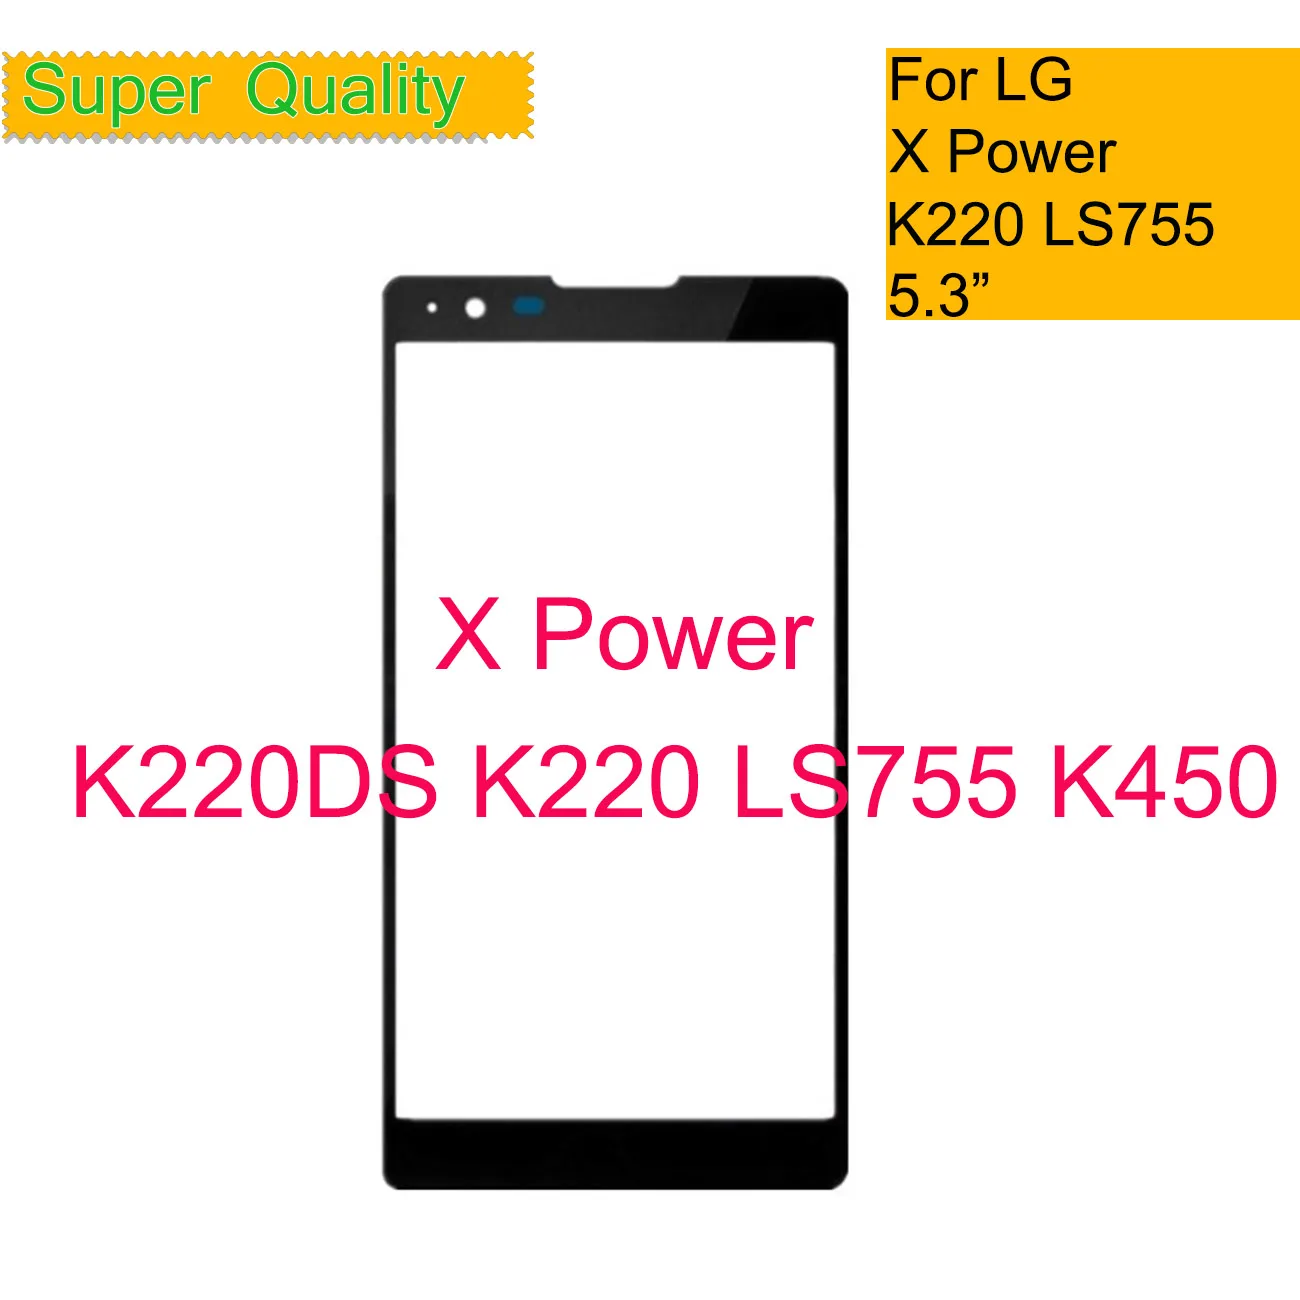 10Pcs/lot For LG X Power K220DS K220 LS755 K450 Touch Screen Panel Front Outer Glass LCD Lens With OCA Replacement